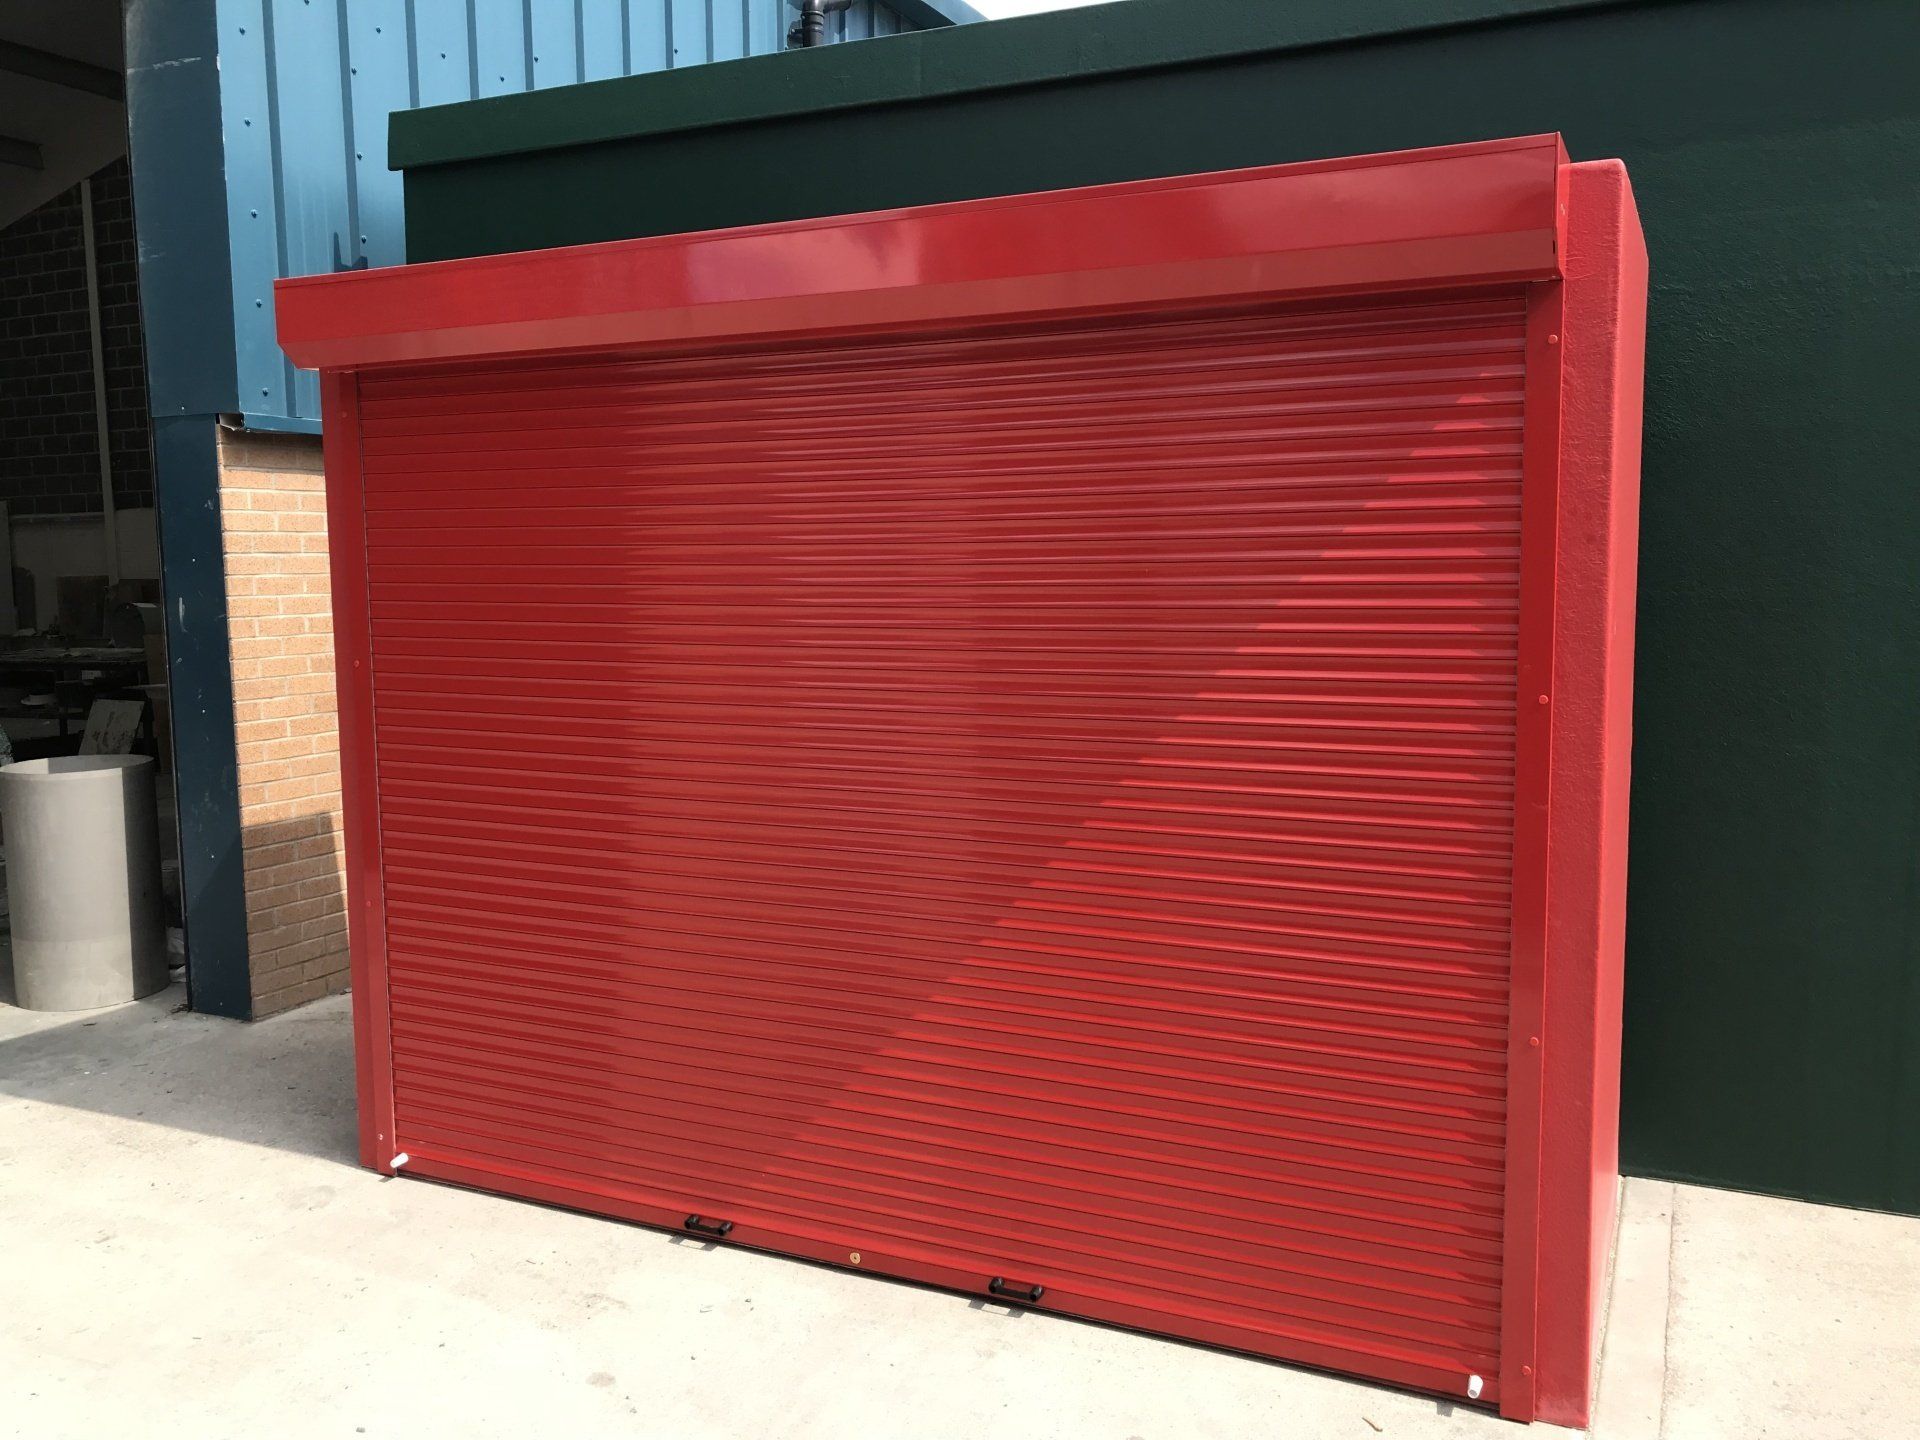 A red garage door is sitting in front of a green building.